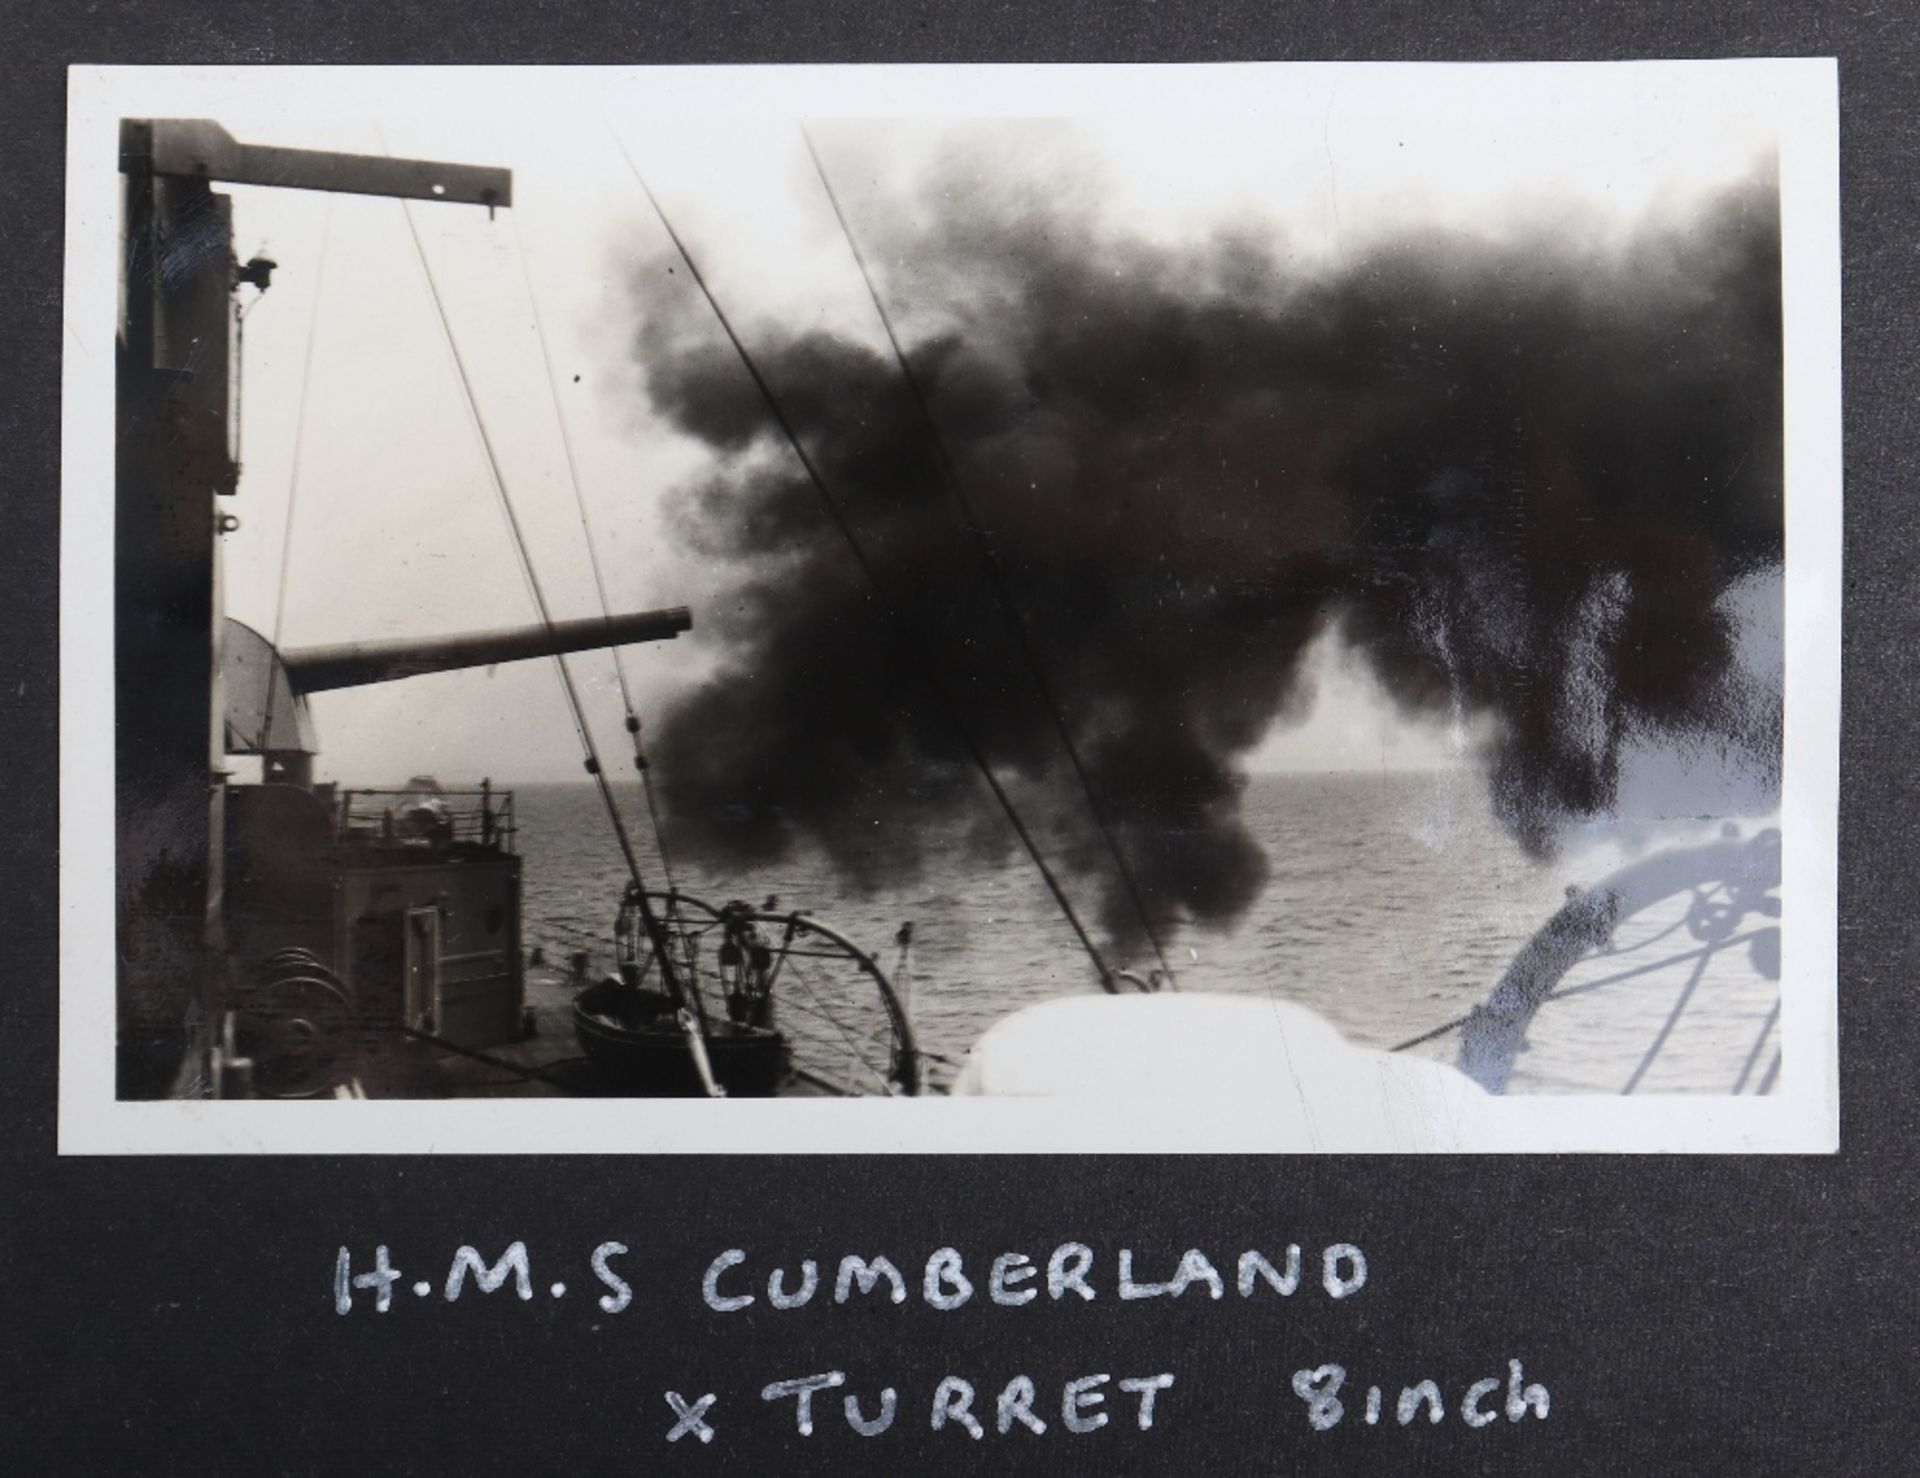 Chinese Lacquered Photograph Album Covering Cruise of HMS Cumberland (5th Cruiser Squadron China) 19 - Image 15 of 23